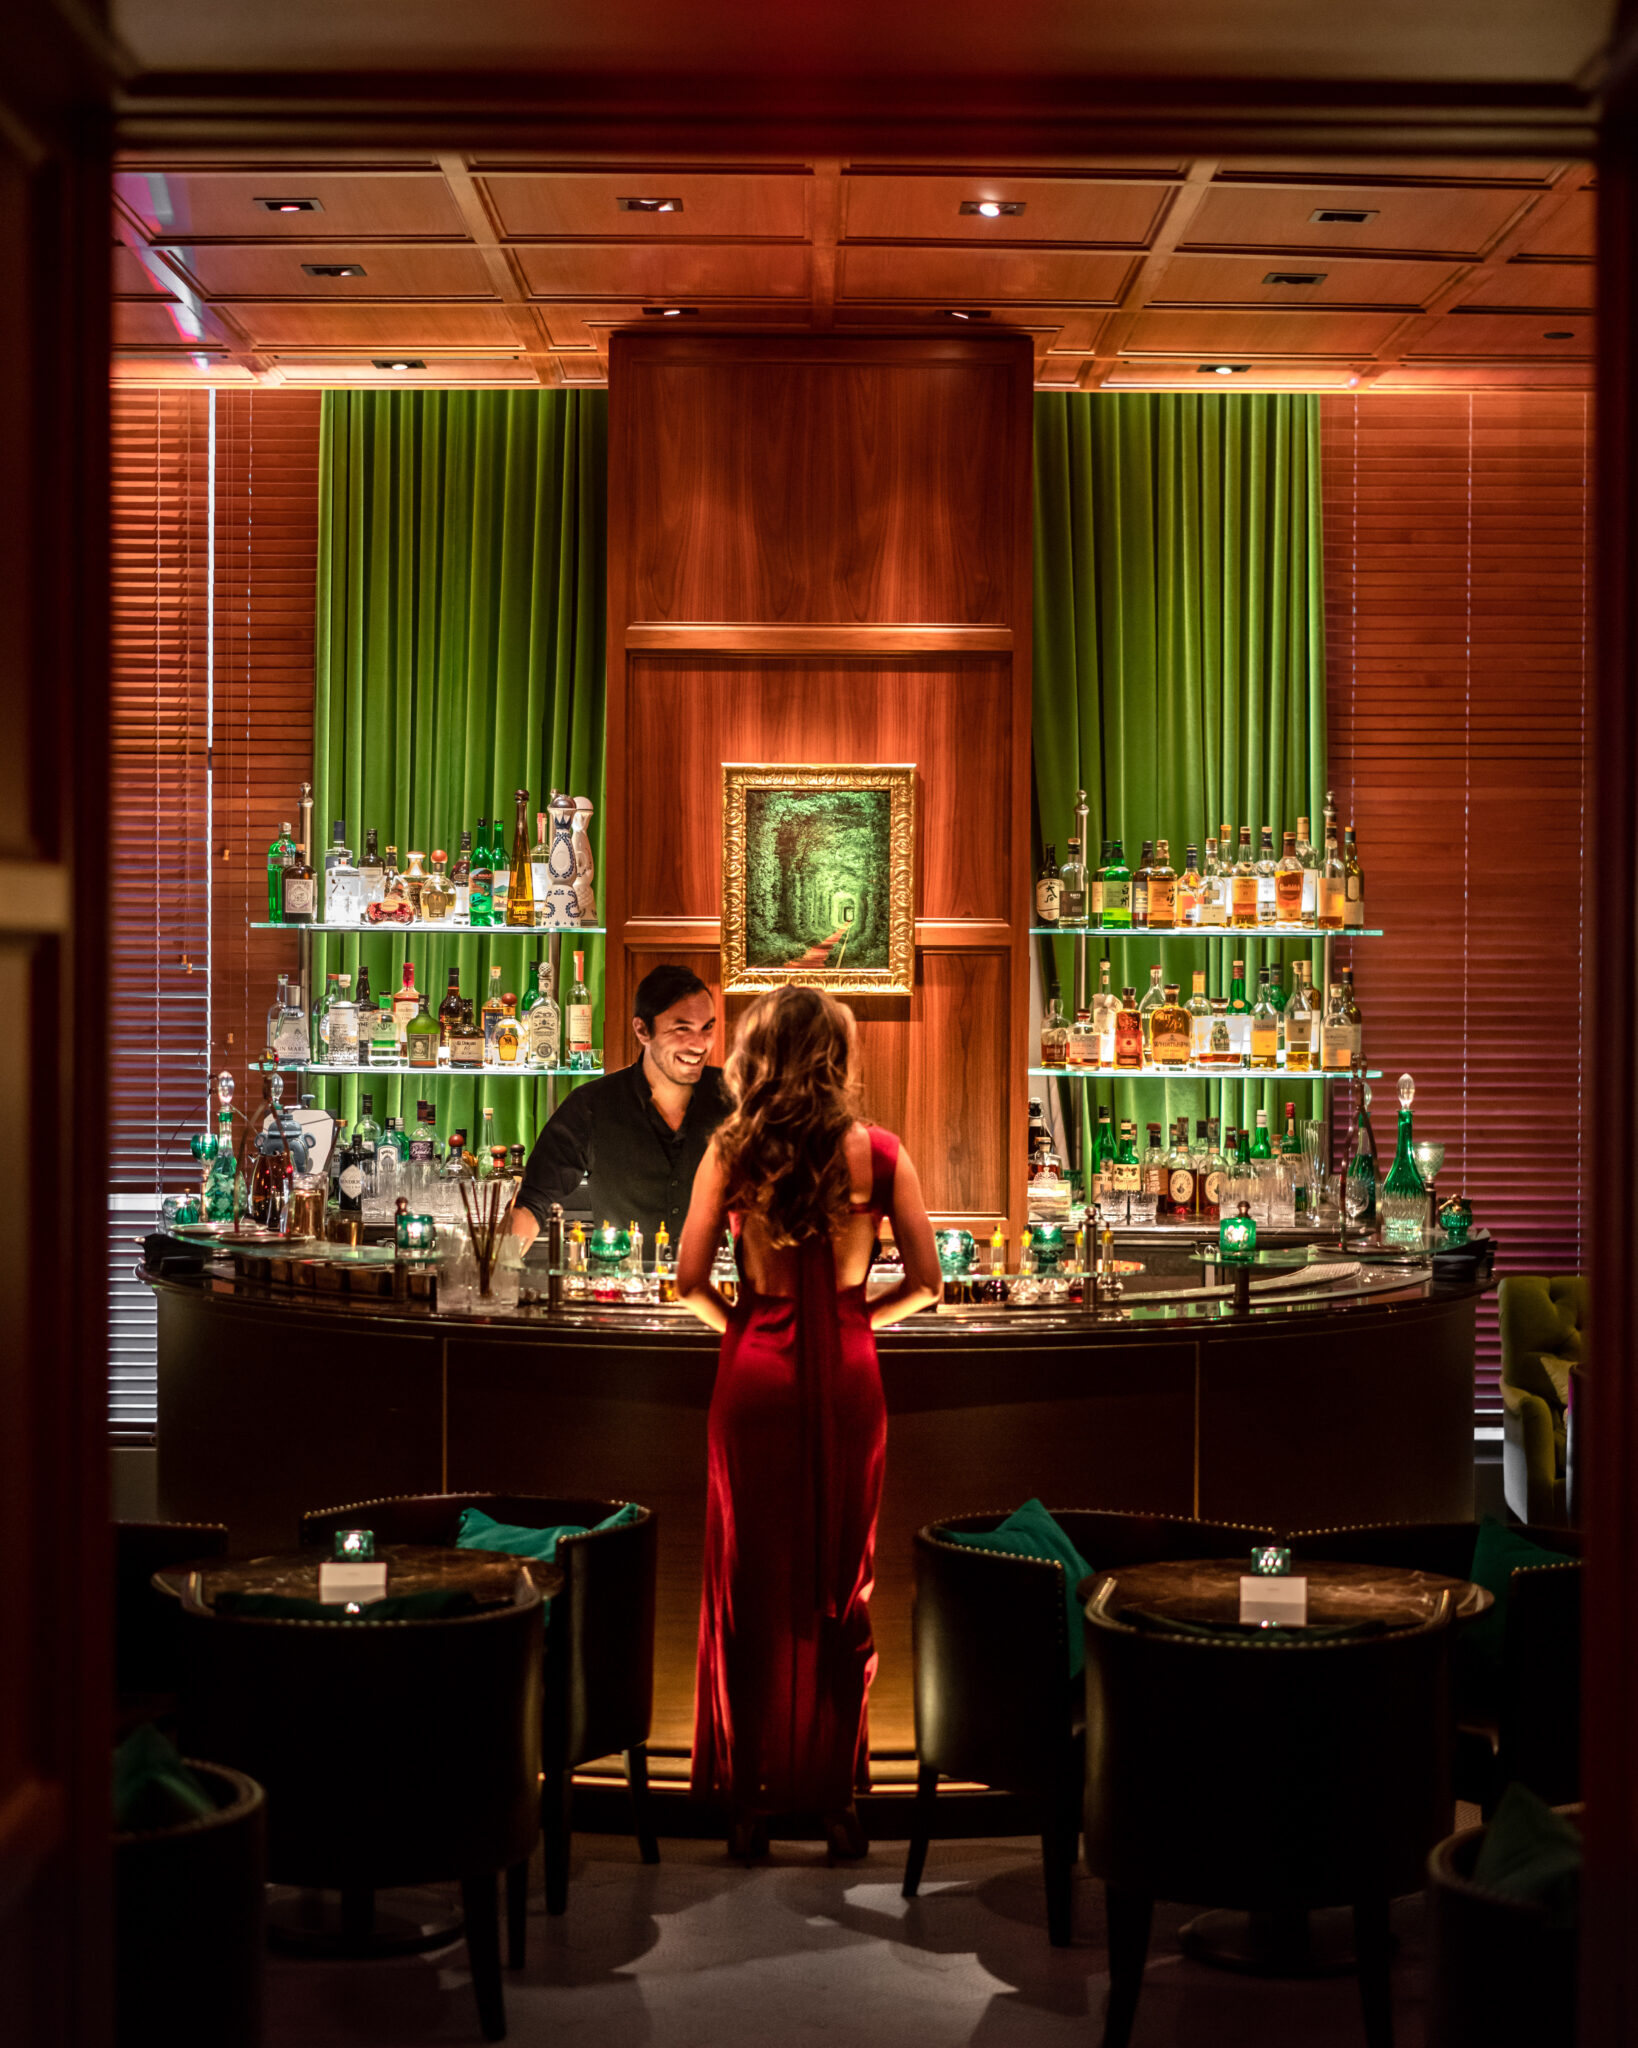 woman in red dress stands at bar talking to bartender in black clothes with green background behind liquor bottles